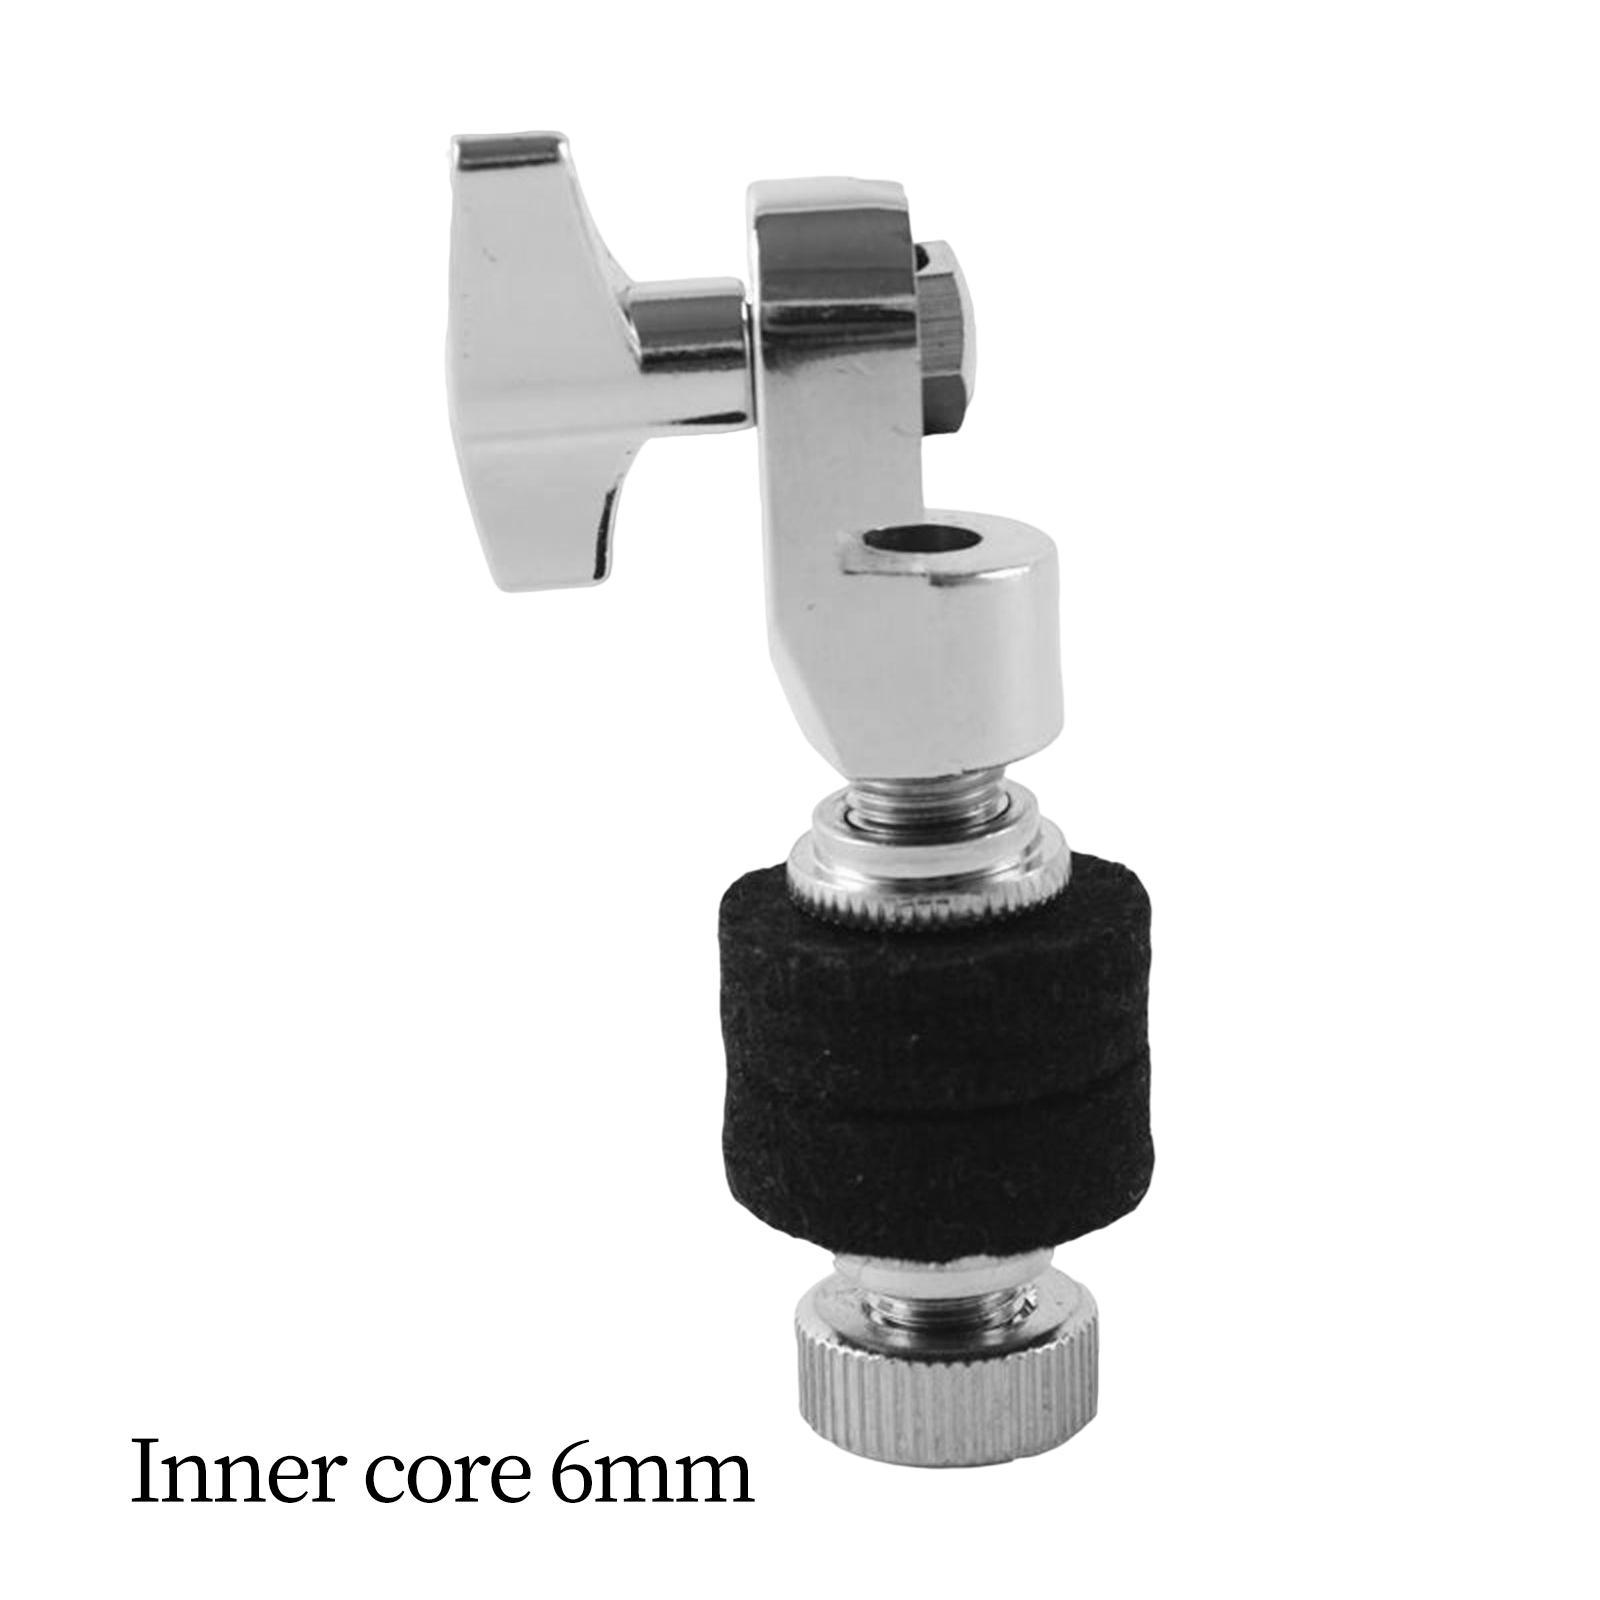 Professional hat Clutch Clamp Holder for Cymbal Accessory